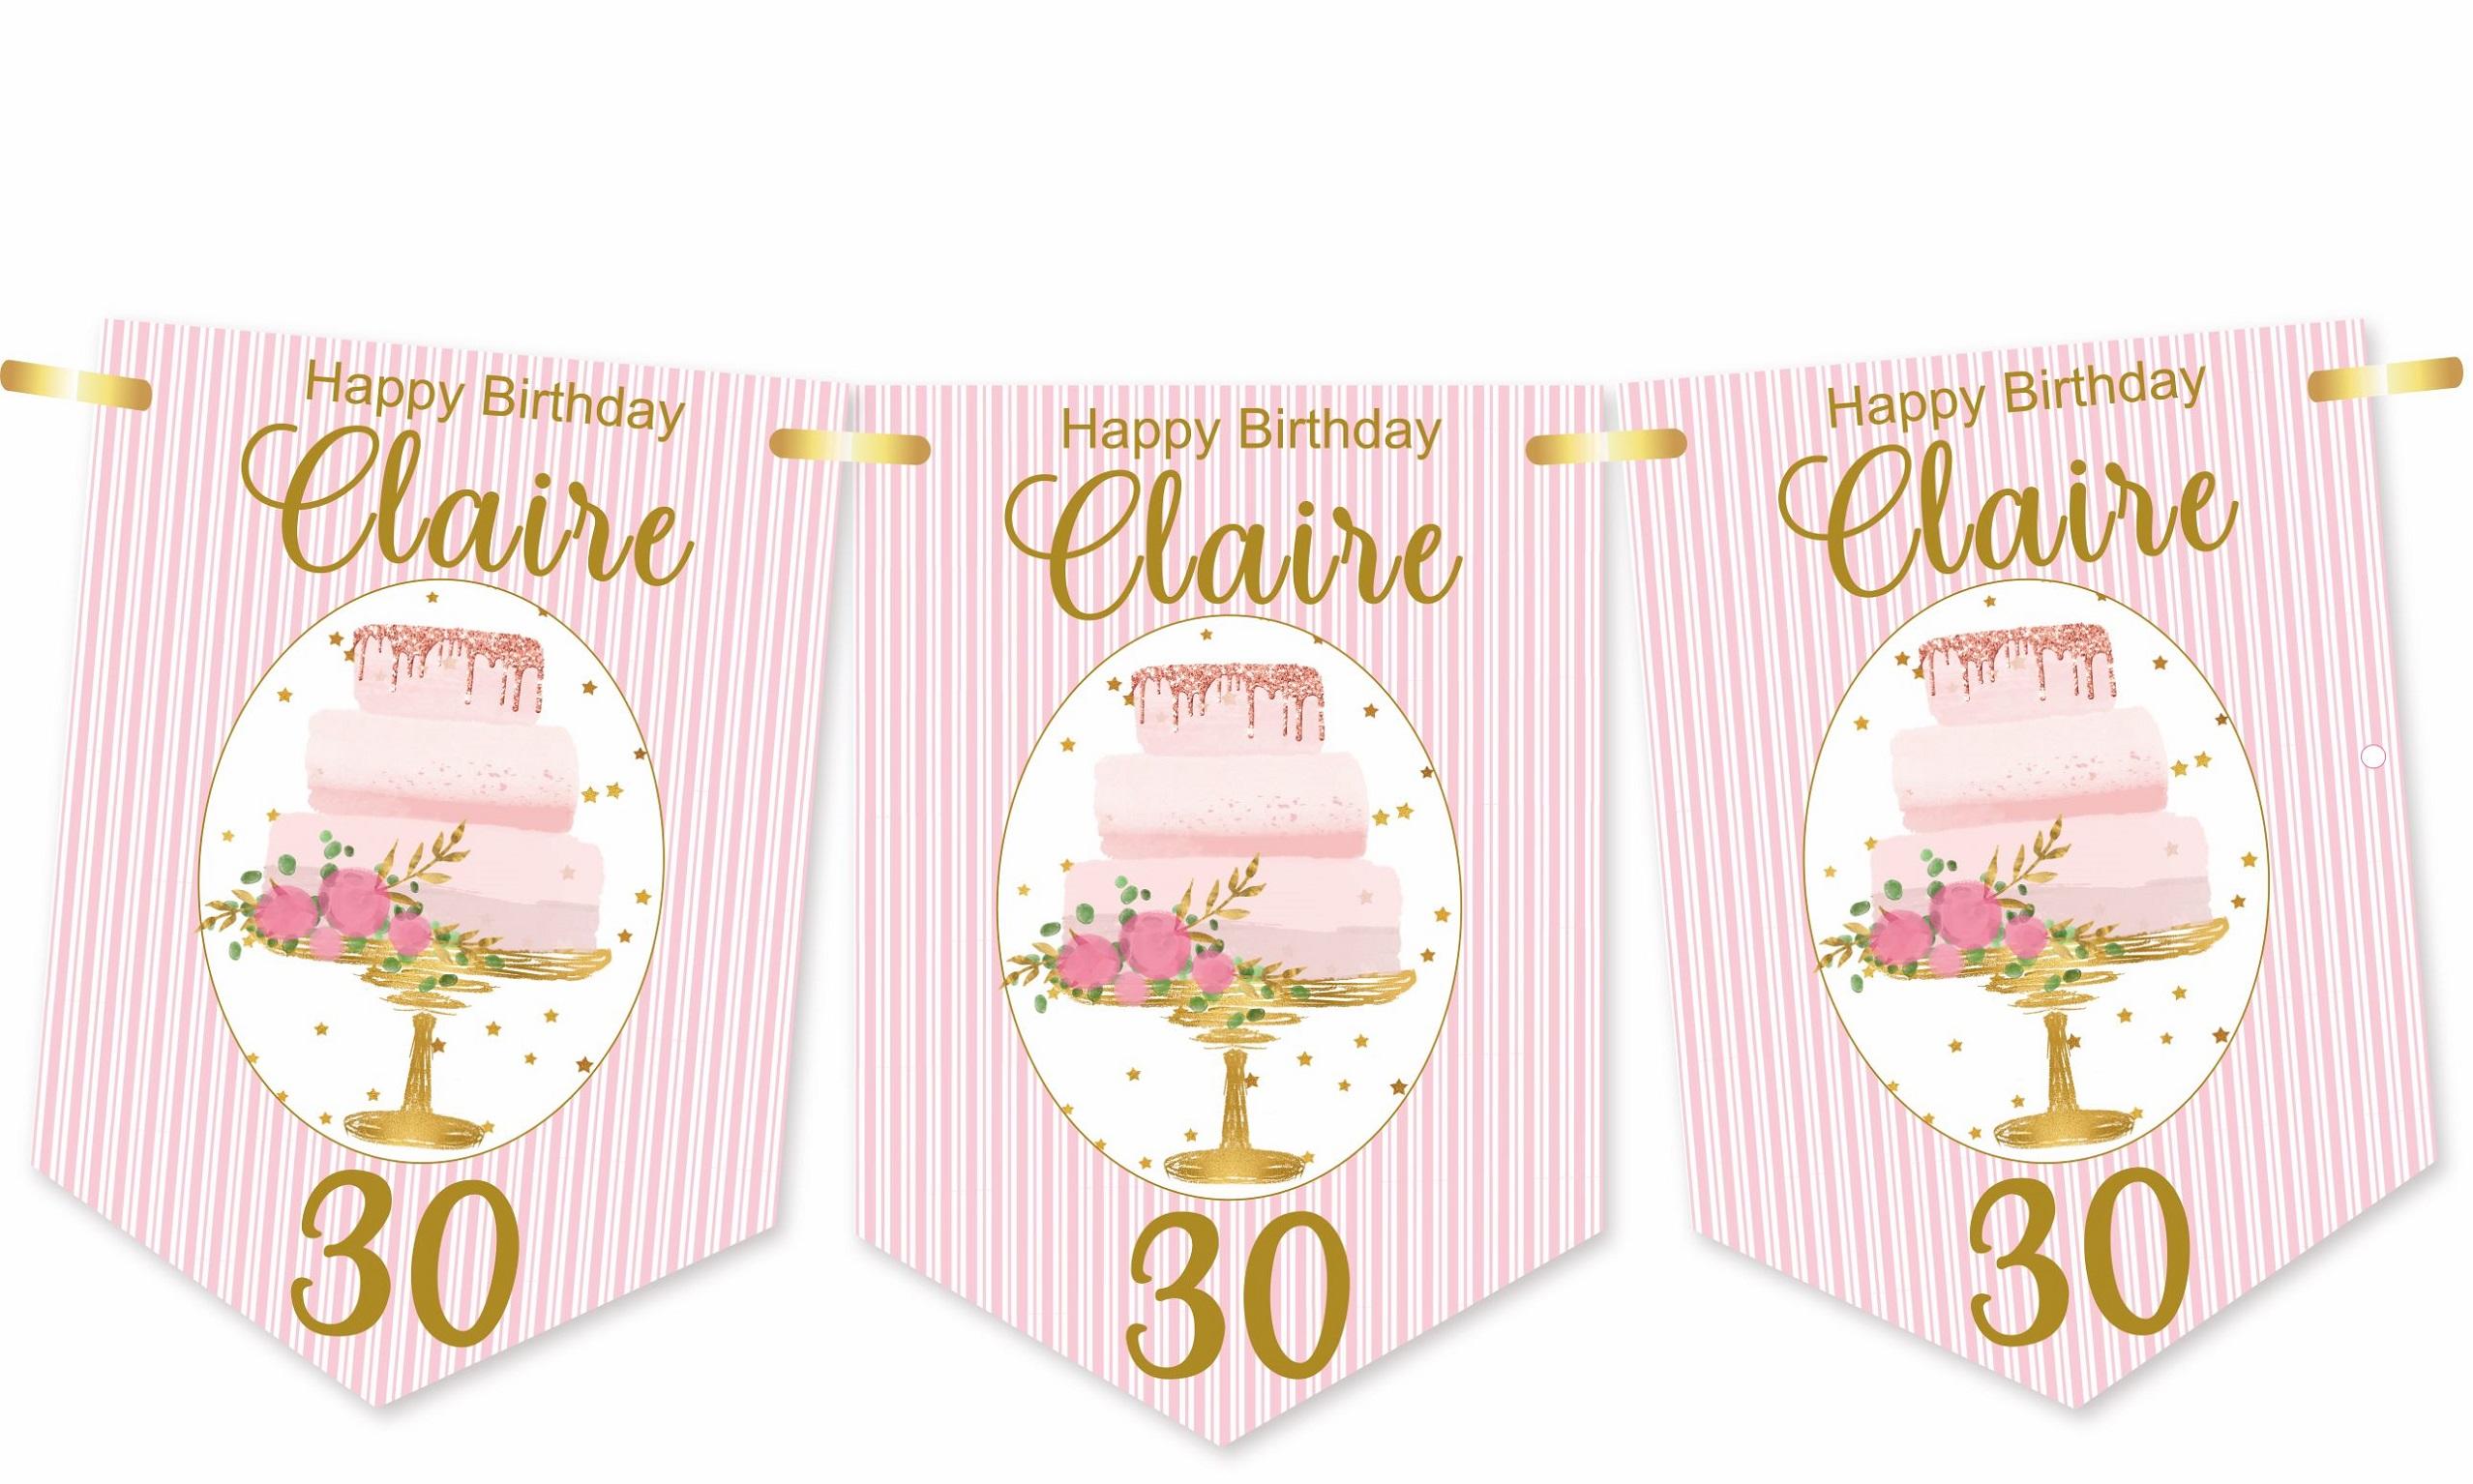 Birthday Cake Bunting,Personalised Birthday Banner,Any Name and Age